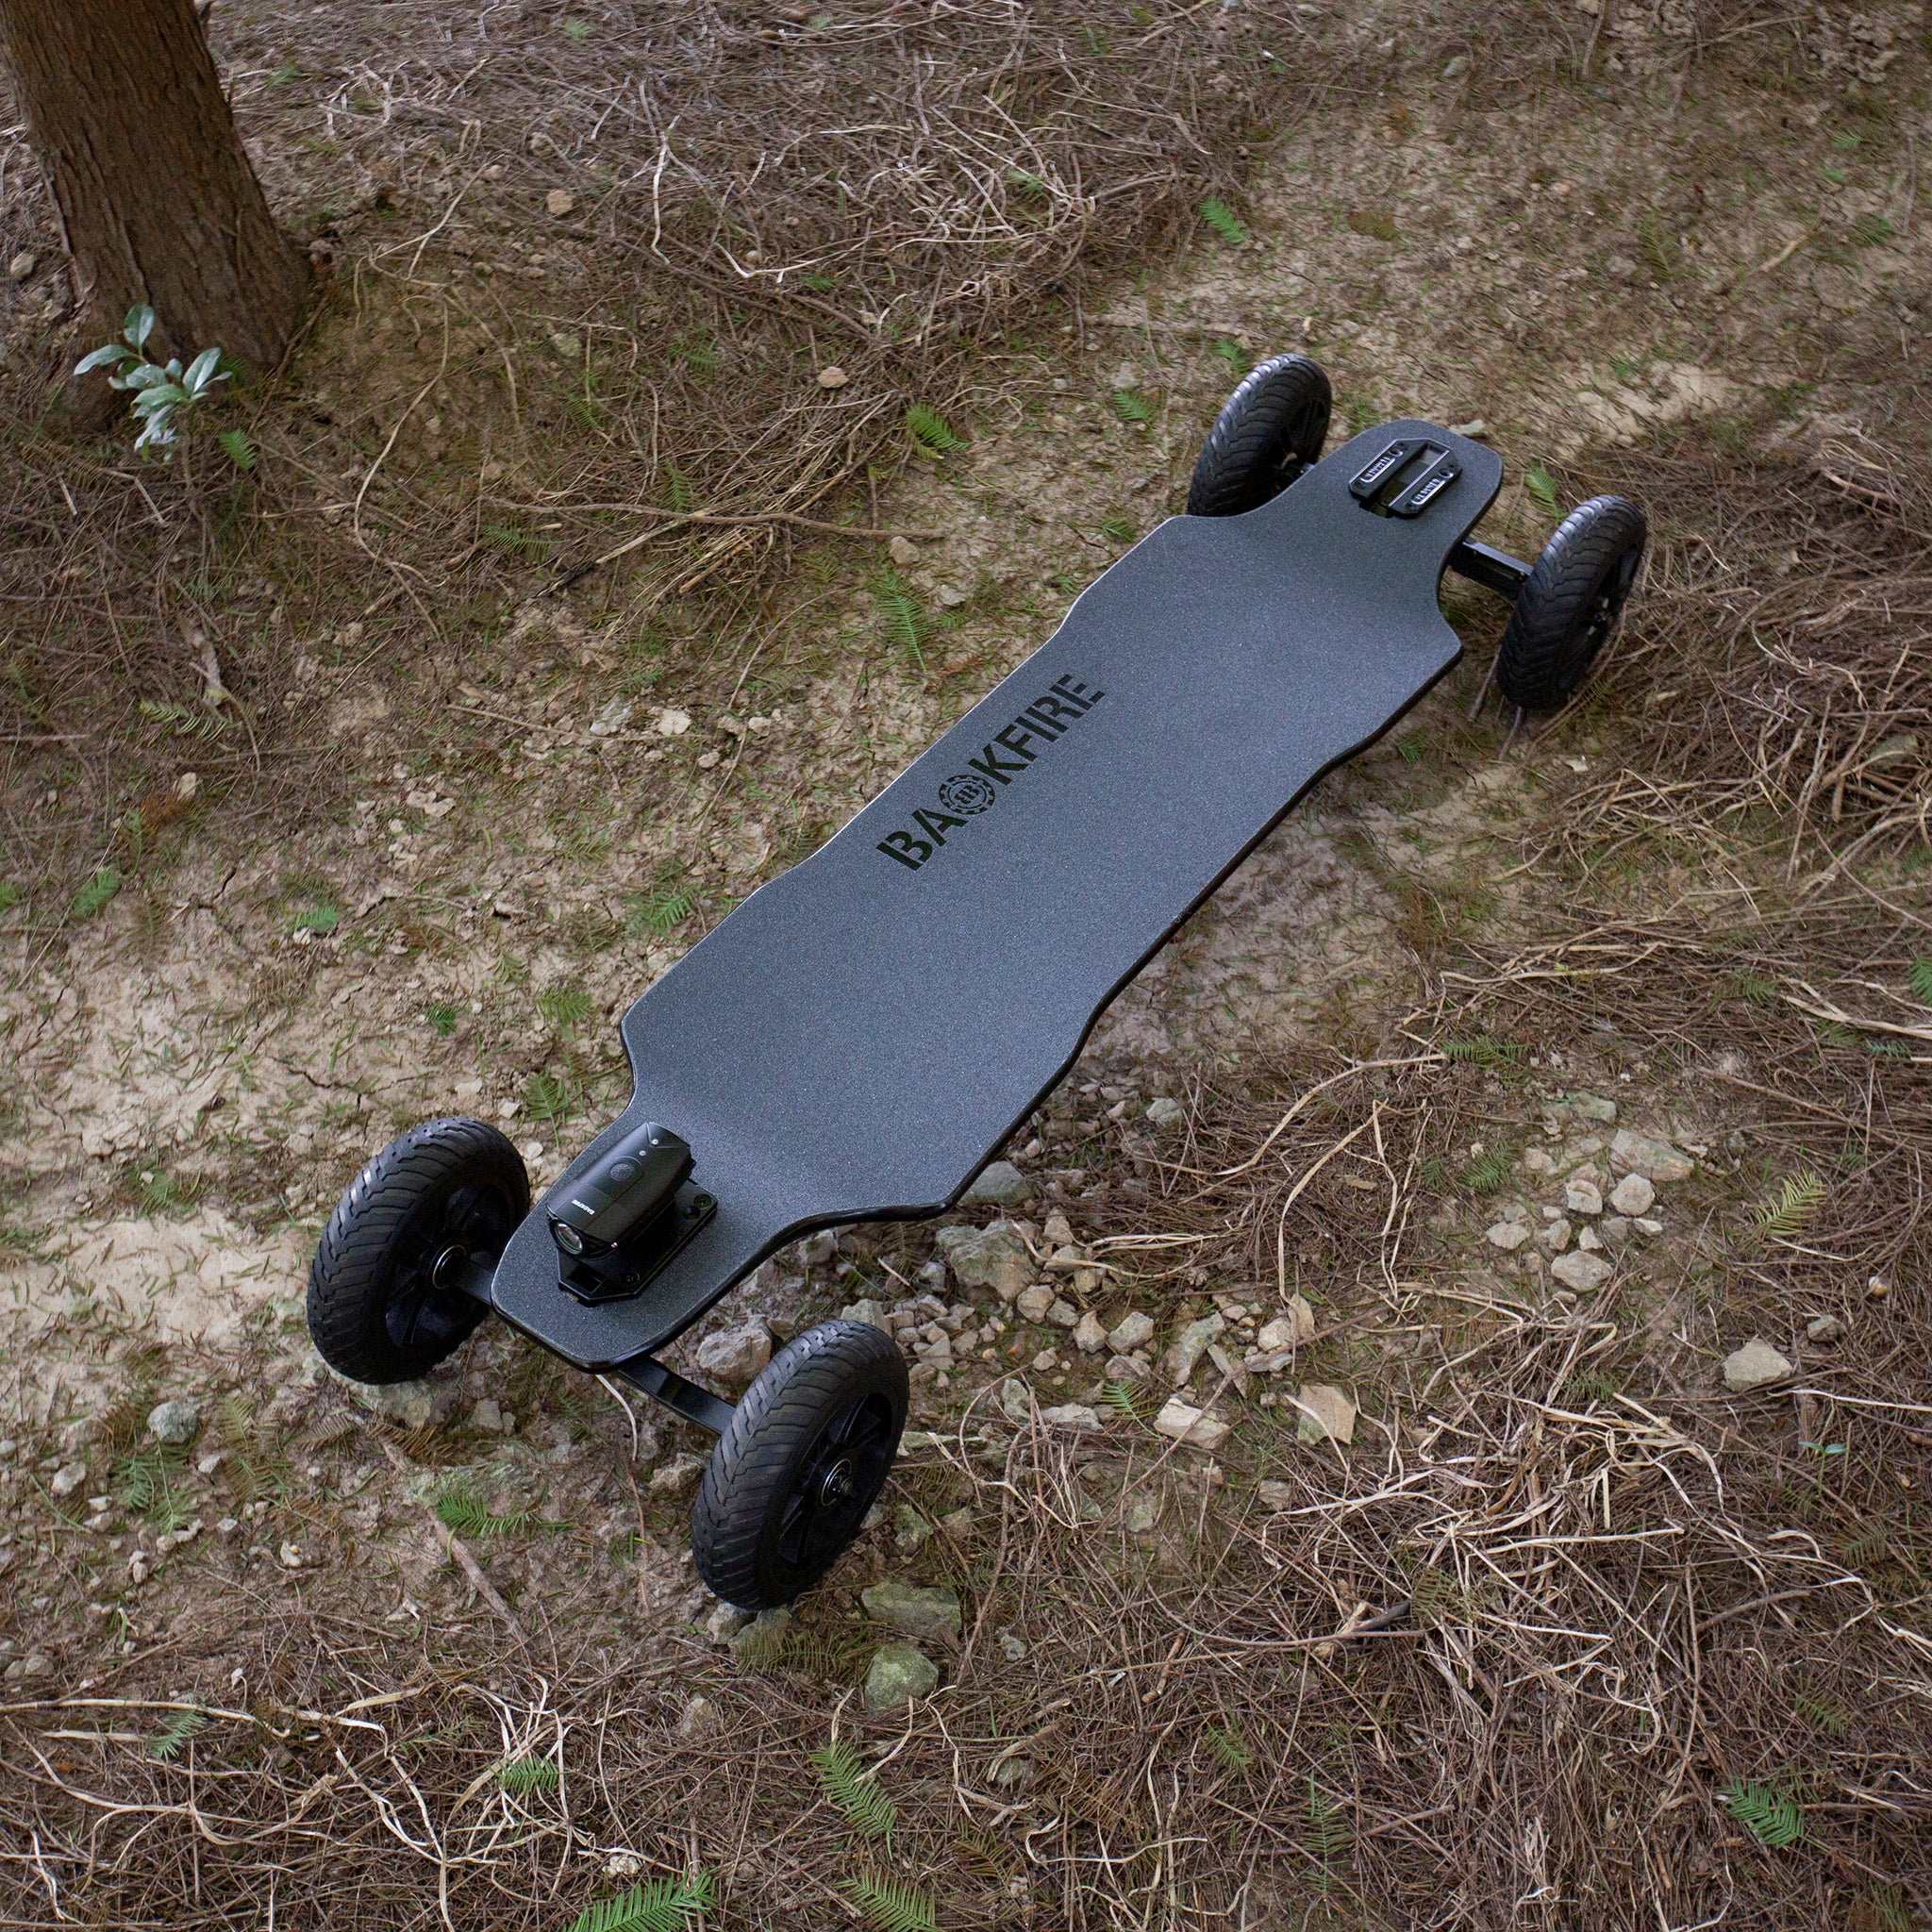 Backfire Ranger X2 All Terrain Electric Skateboard with 1200W X2 Ultra High Power Ultra High Torque Motors and 12S High Voltage High Efficiency Electronic System